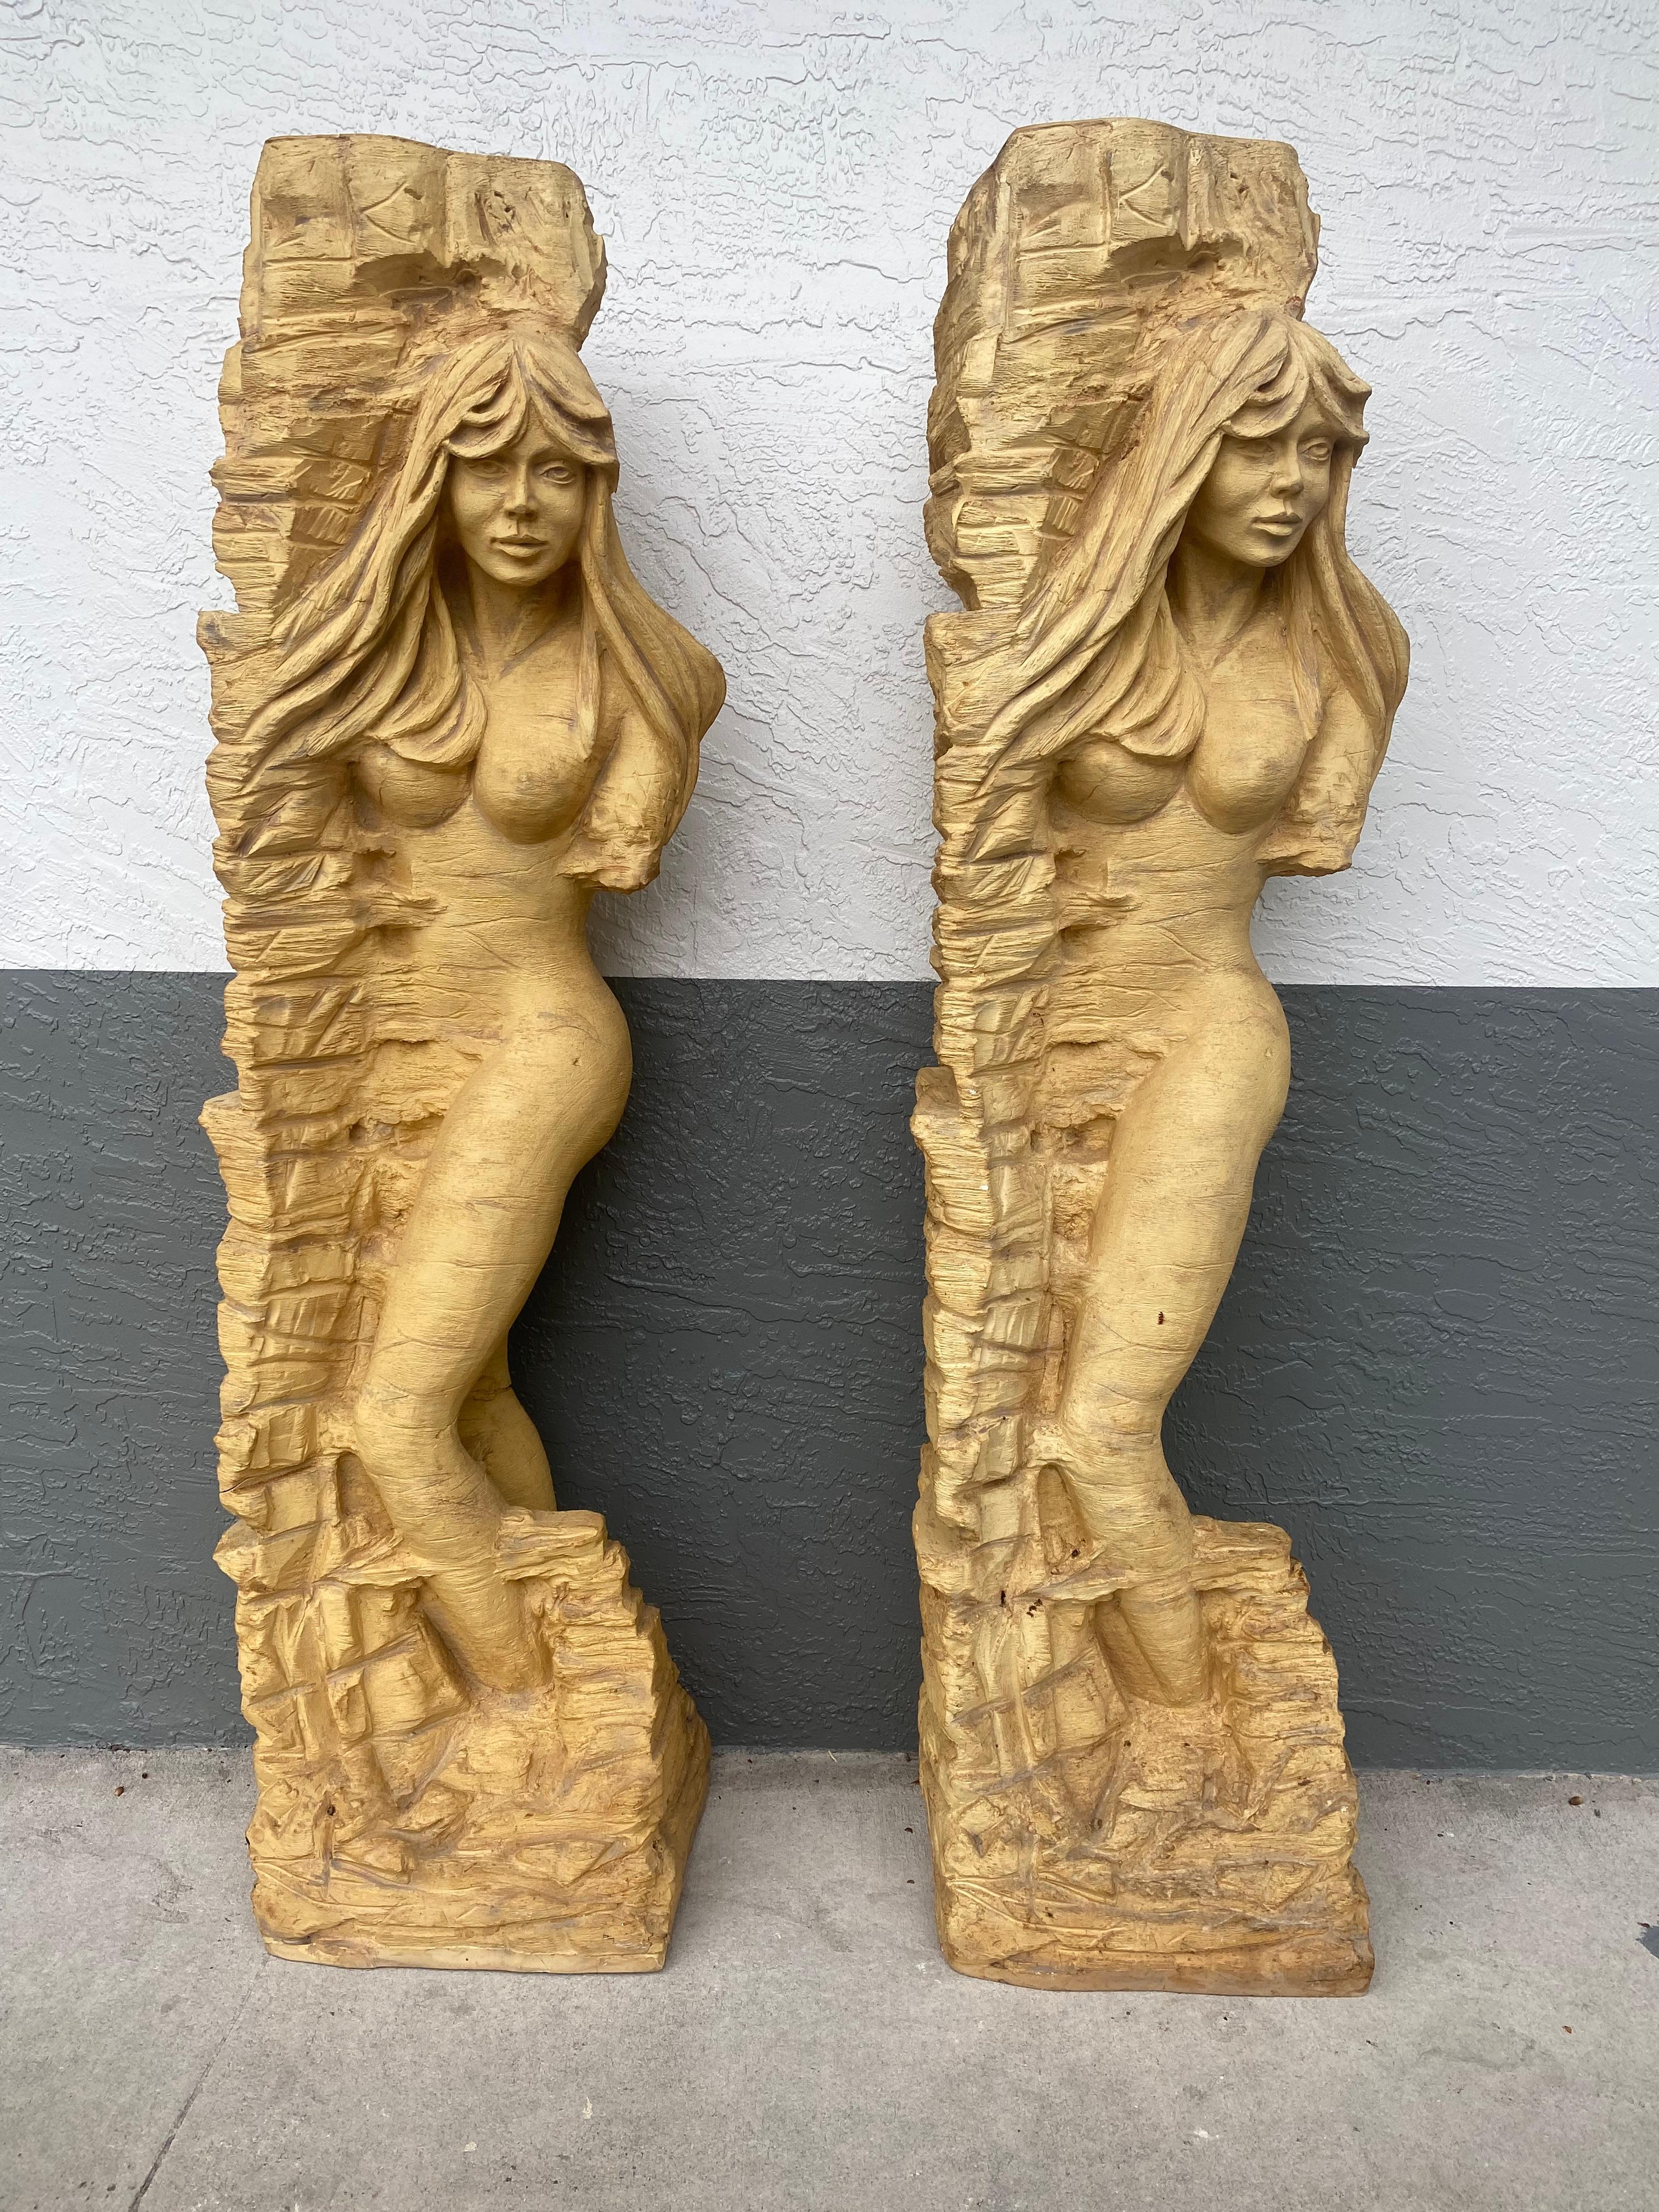 These extremely rare and stylish statues are packed with personality! Outstanding design is exhibited throughout. We are delighted to offer for sale this absolutely stunning parchment life-size sculpture statues of nude female Sirens in resin